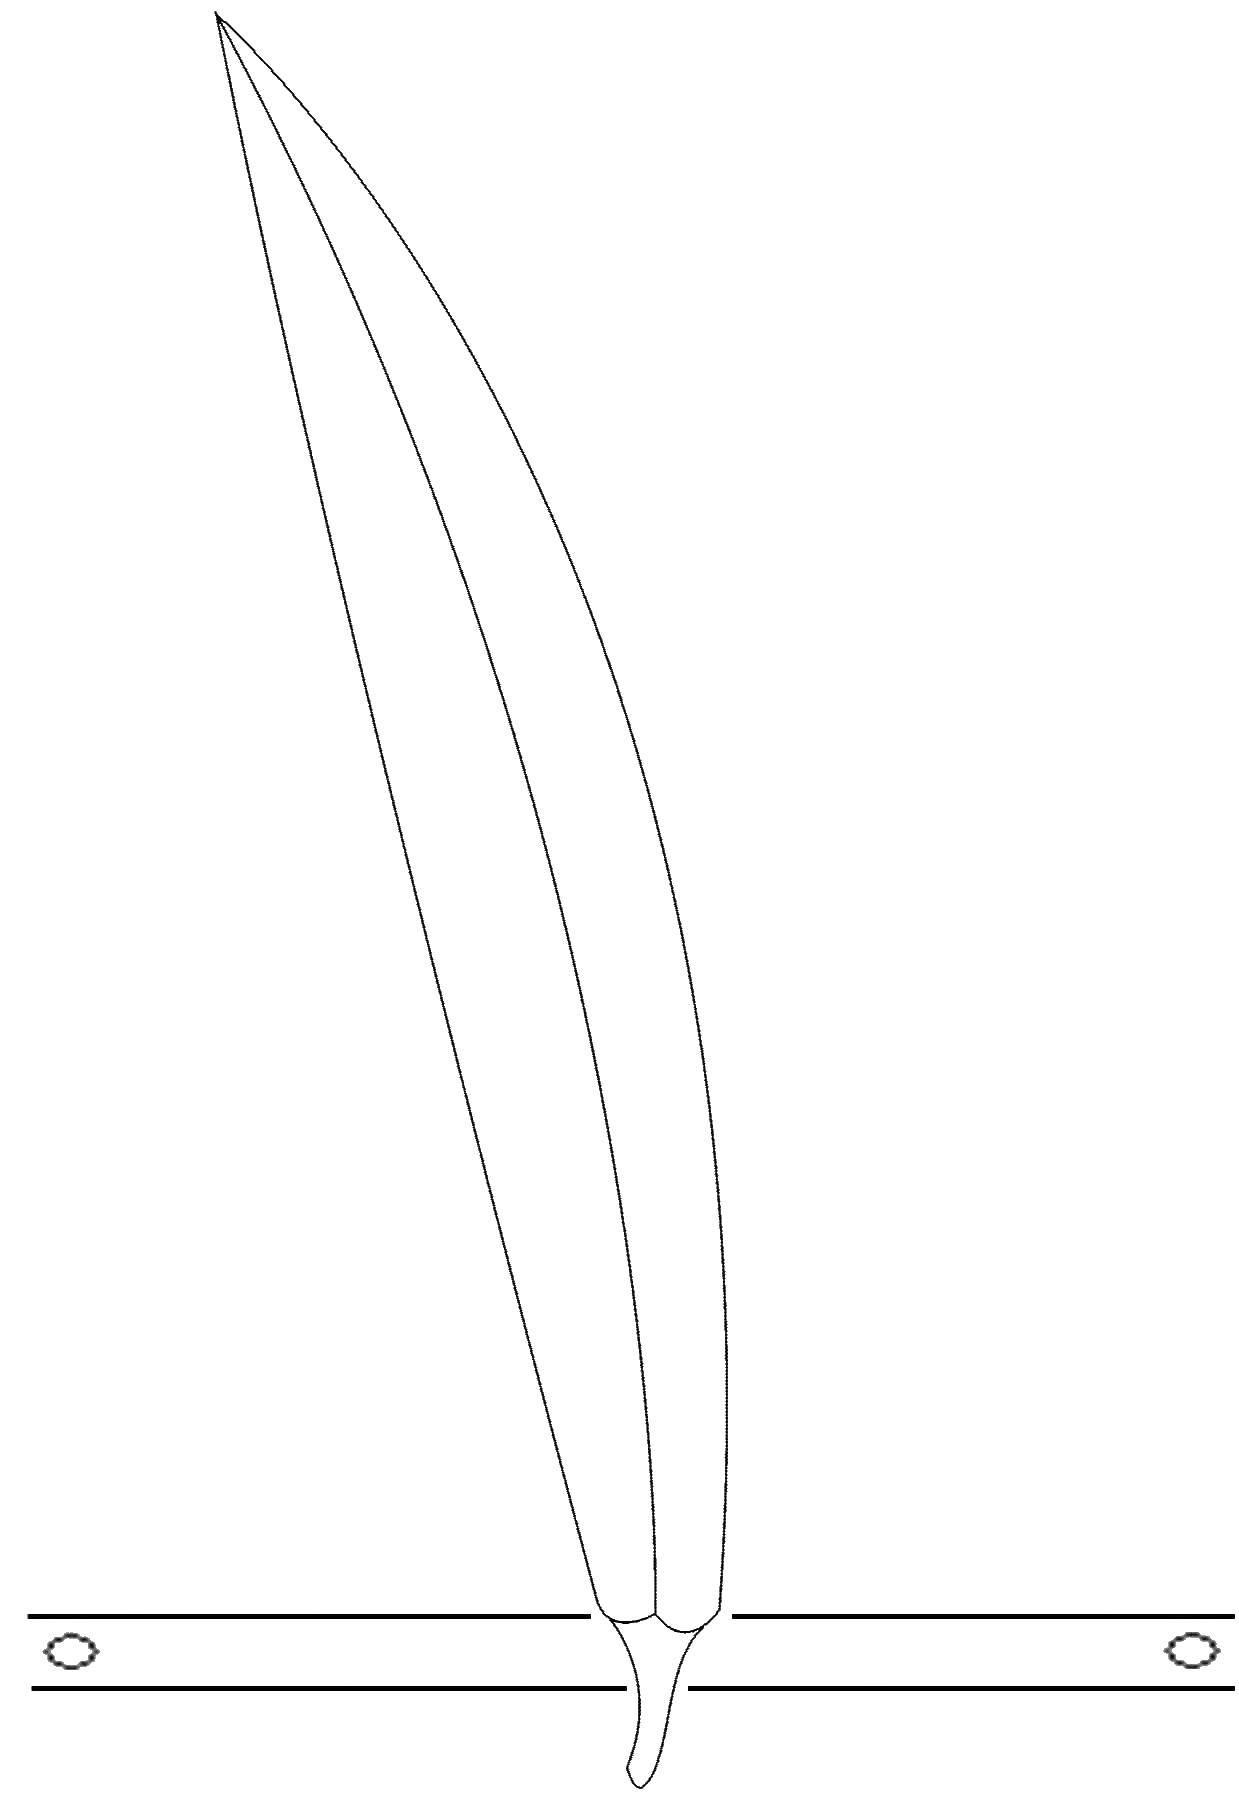 Coloring Sheet. Category The contours of the leaves. Tags:  leaves.